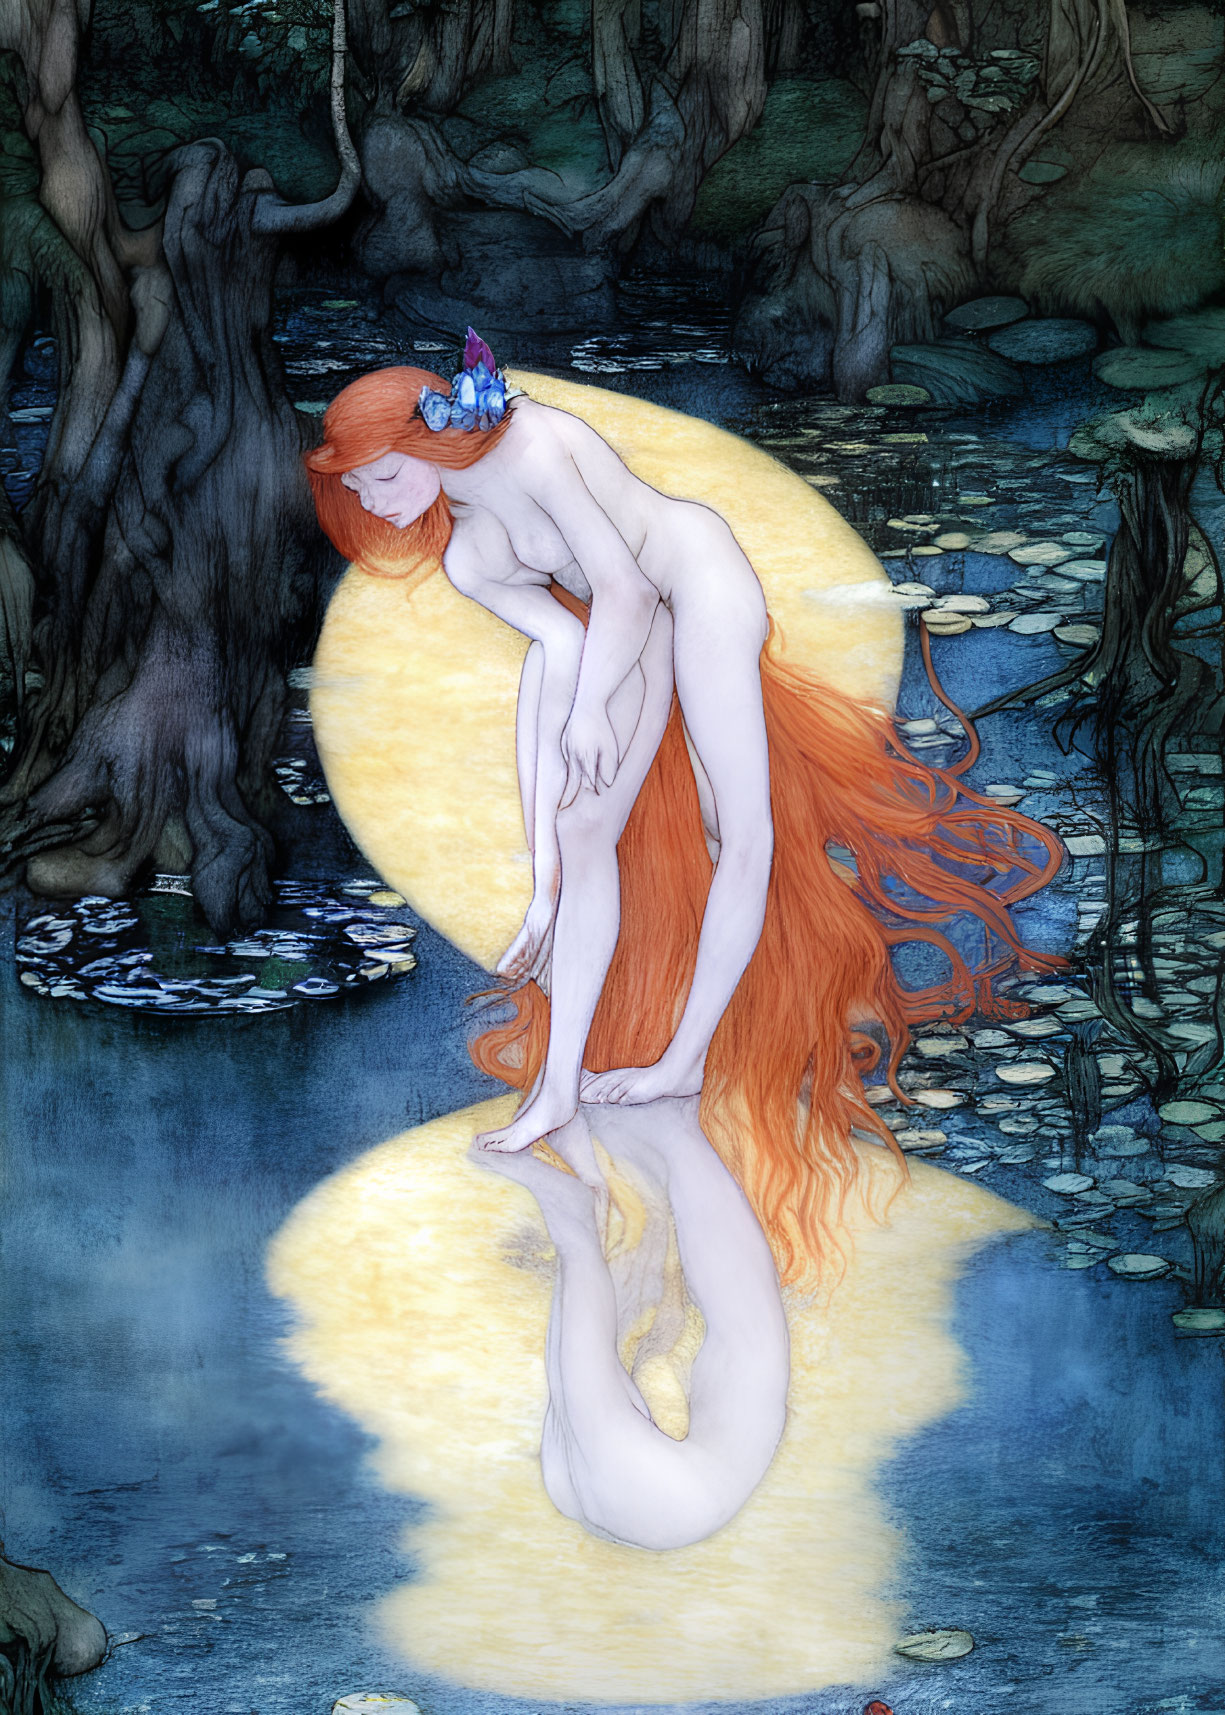 Red-haired female figure in moonlit woods gazes at water with lily pads.